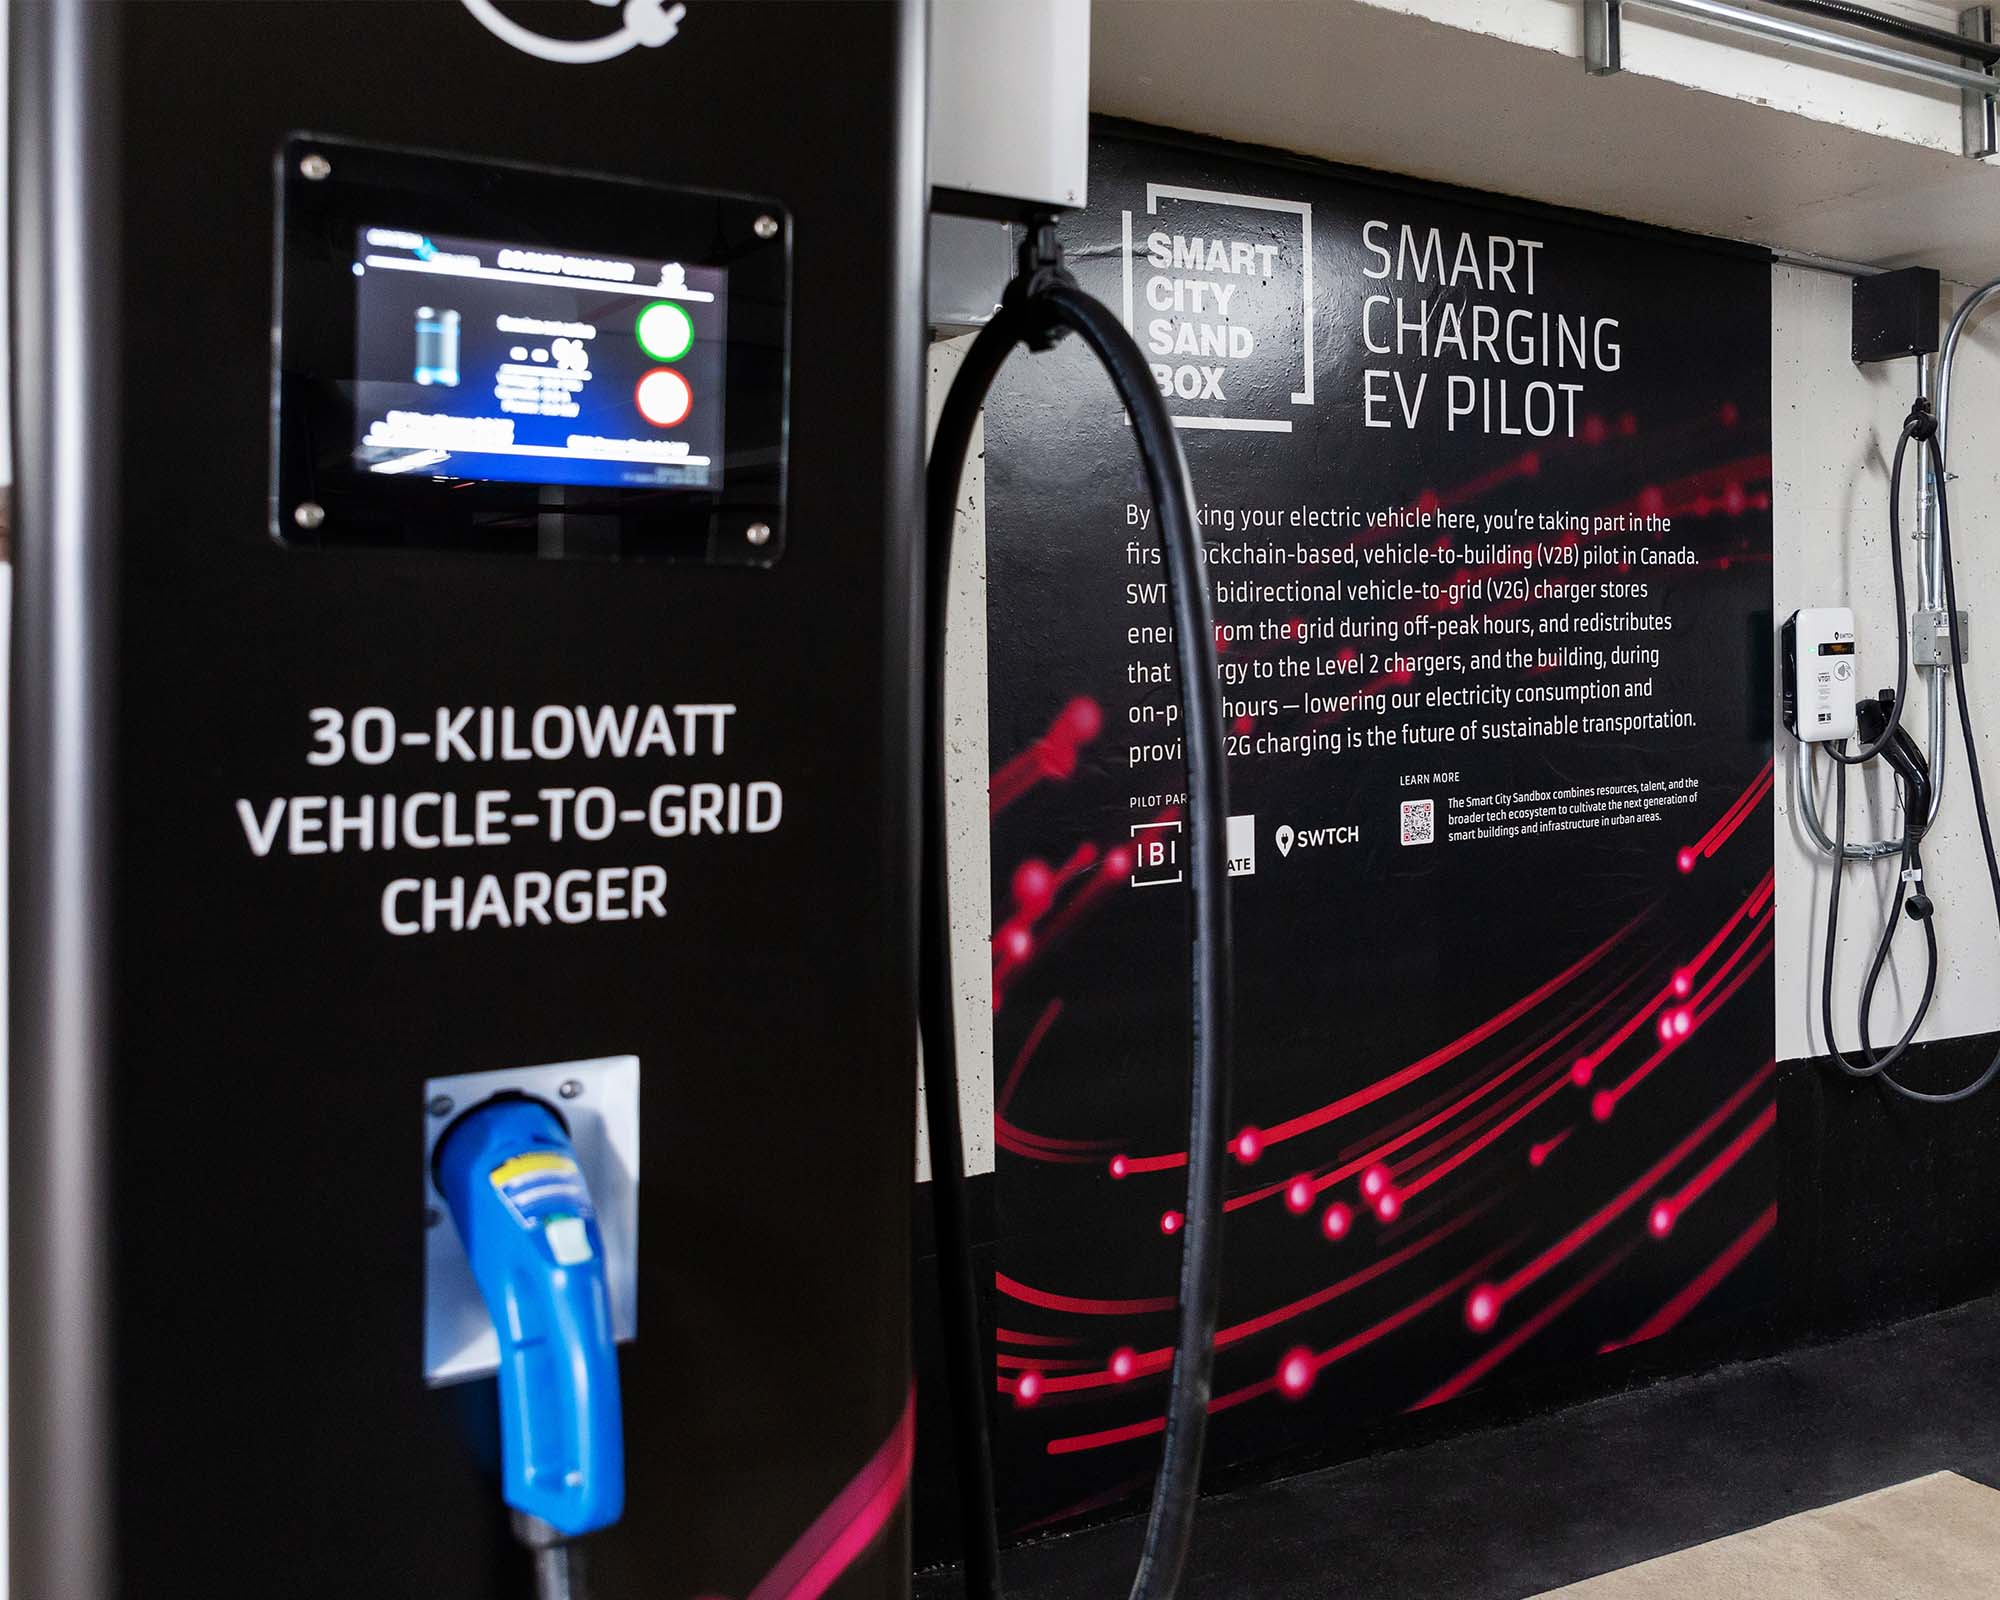 SWTCH Pilots BlockchainEnabled, Electric Vehicle Charging Station